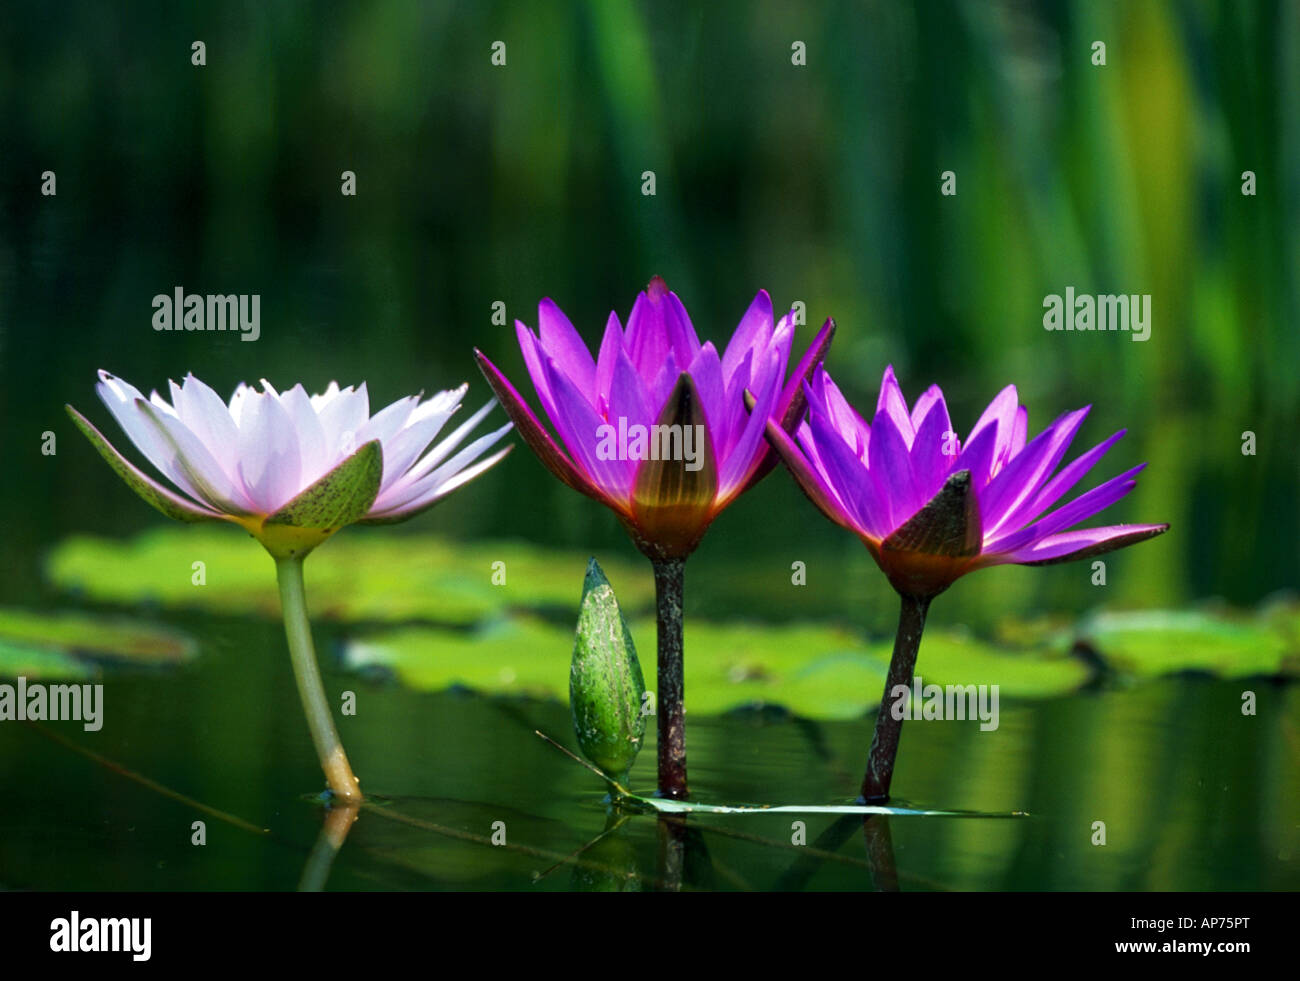 Three water lilies in a pond Stock Photo